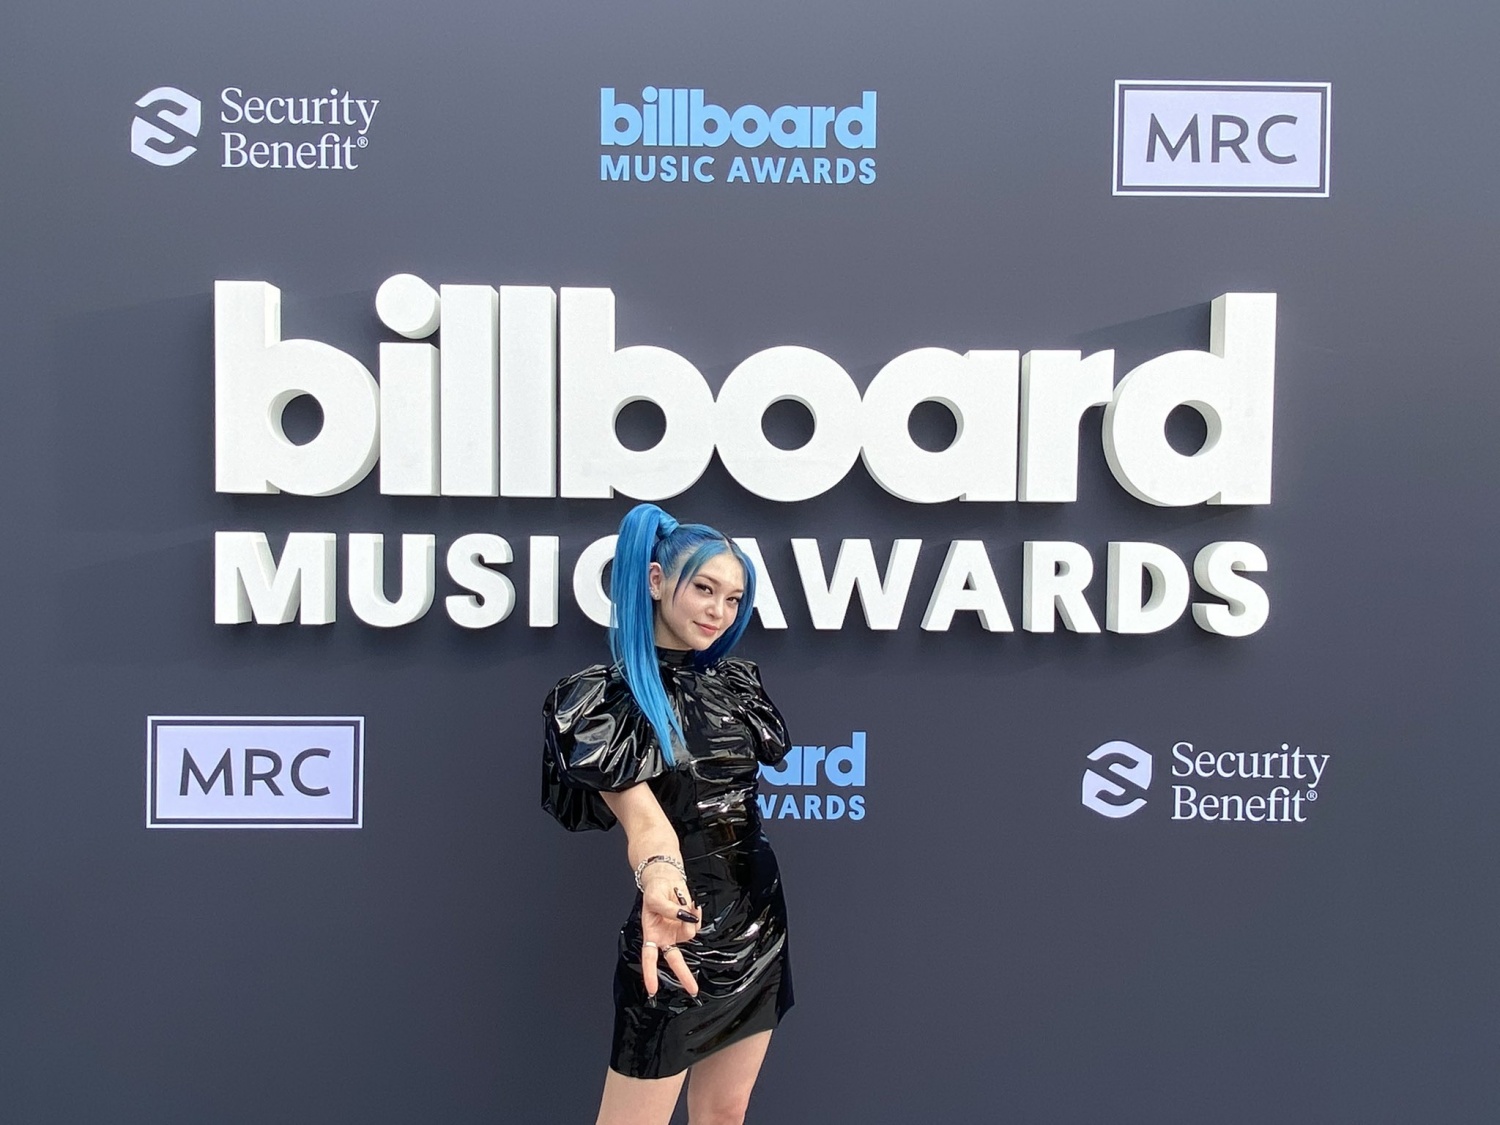 AleXa "'Happy to win ASC, looking forward to the day my song will be released at the Billboard Music Awards"